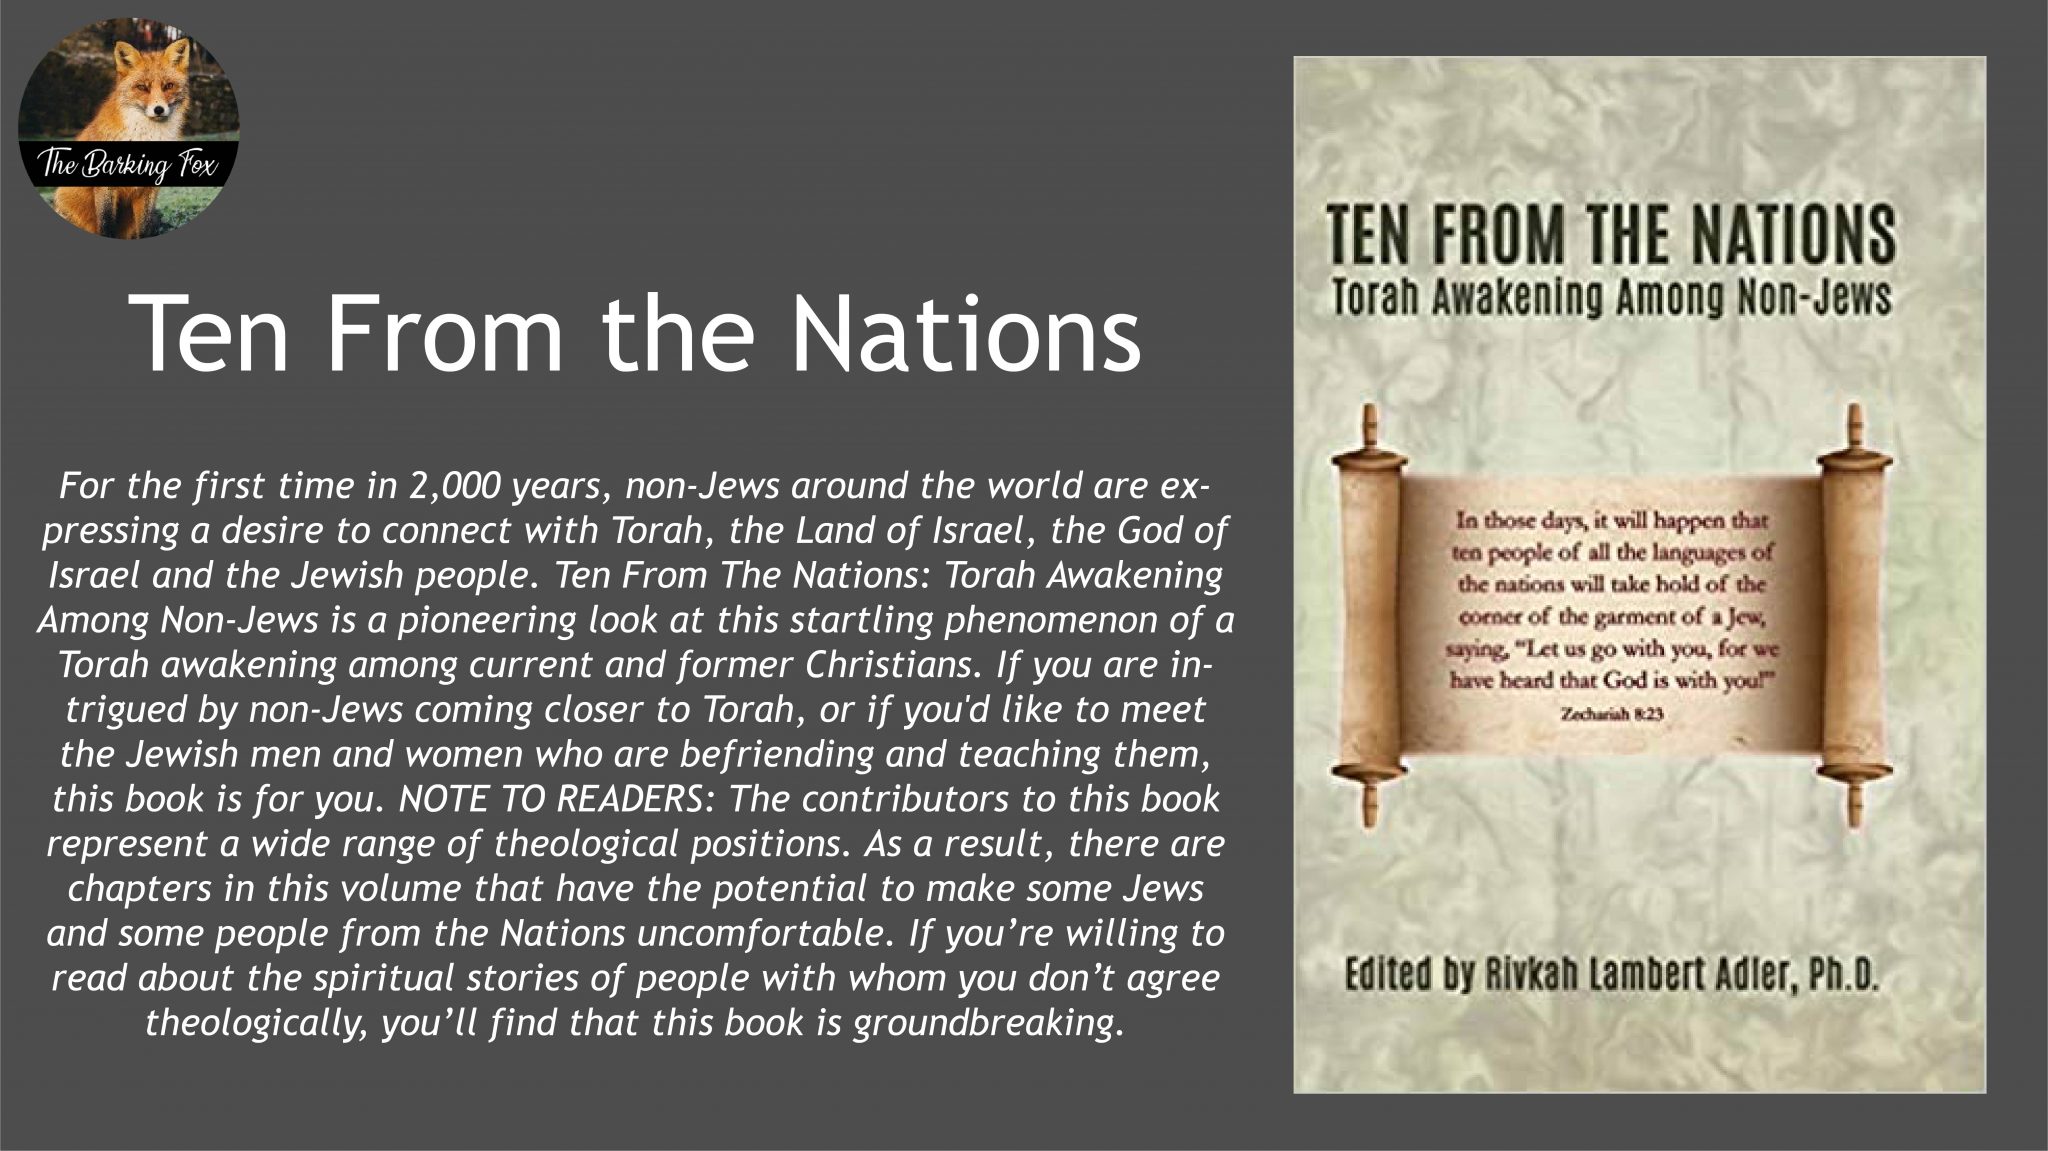 Ten From the Nations Cover and Description